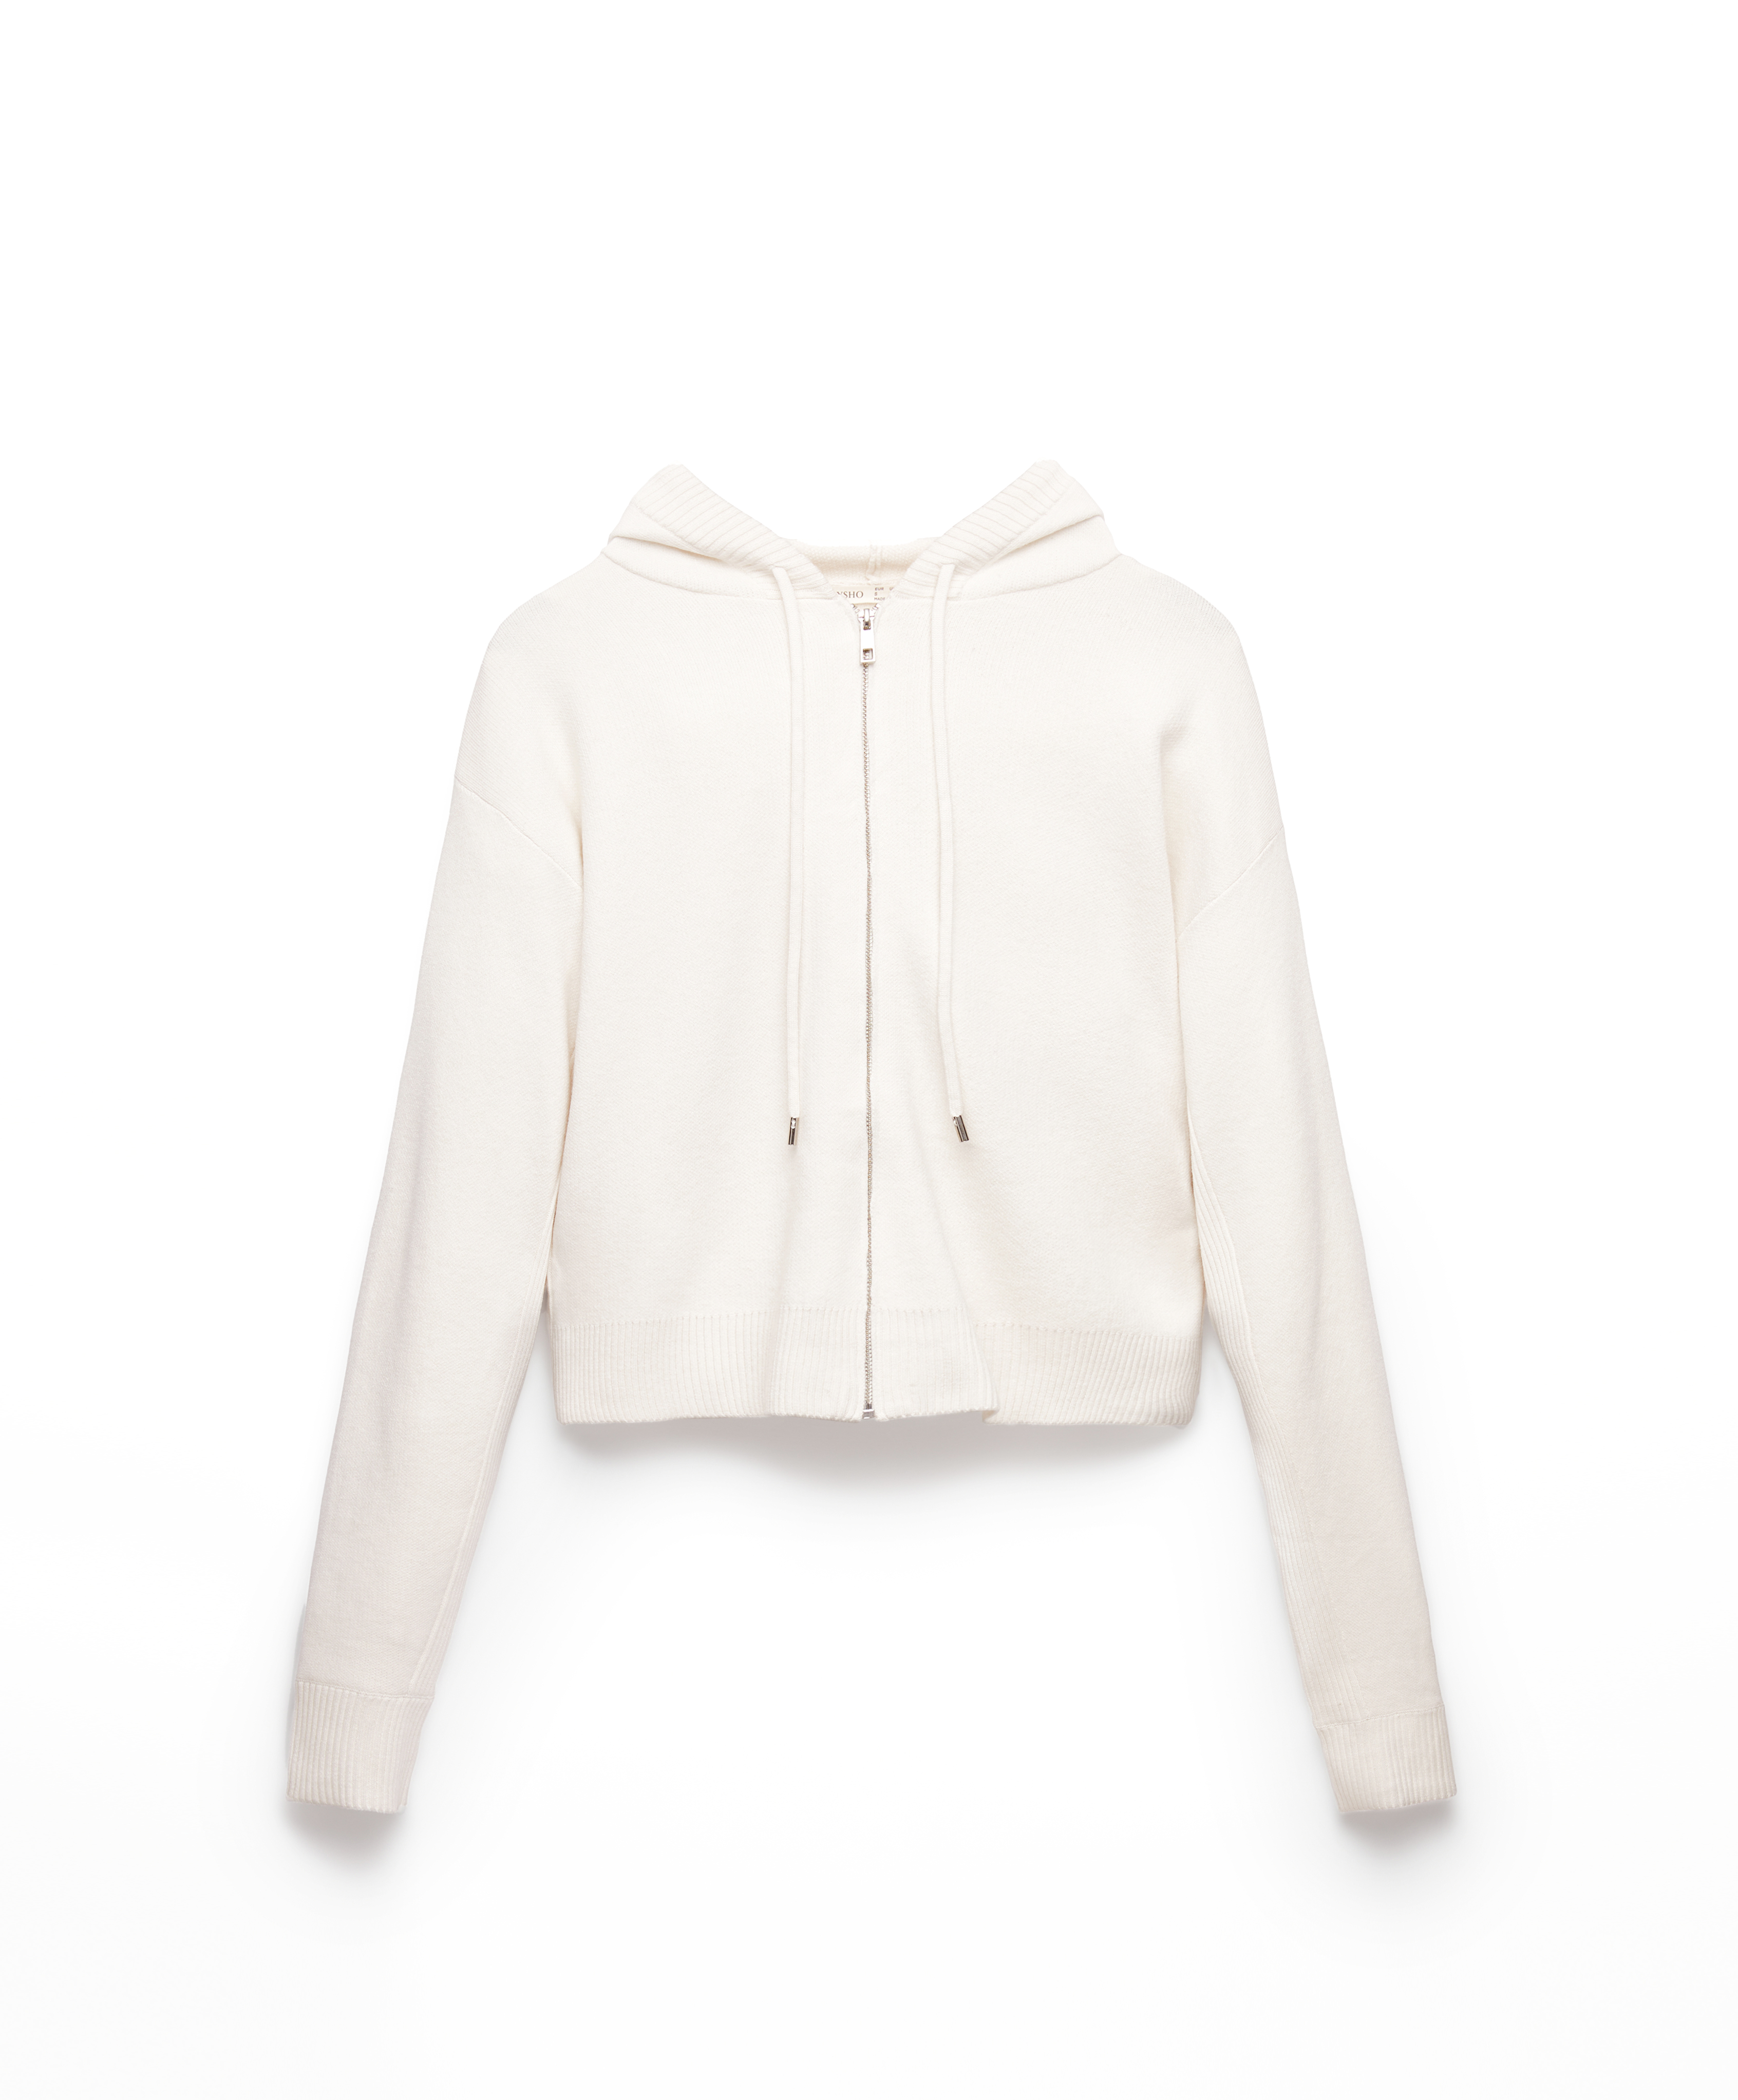 Knit crop jacket with zip fastening and rib detail at the sides. Adjustable drawstring hood.